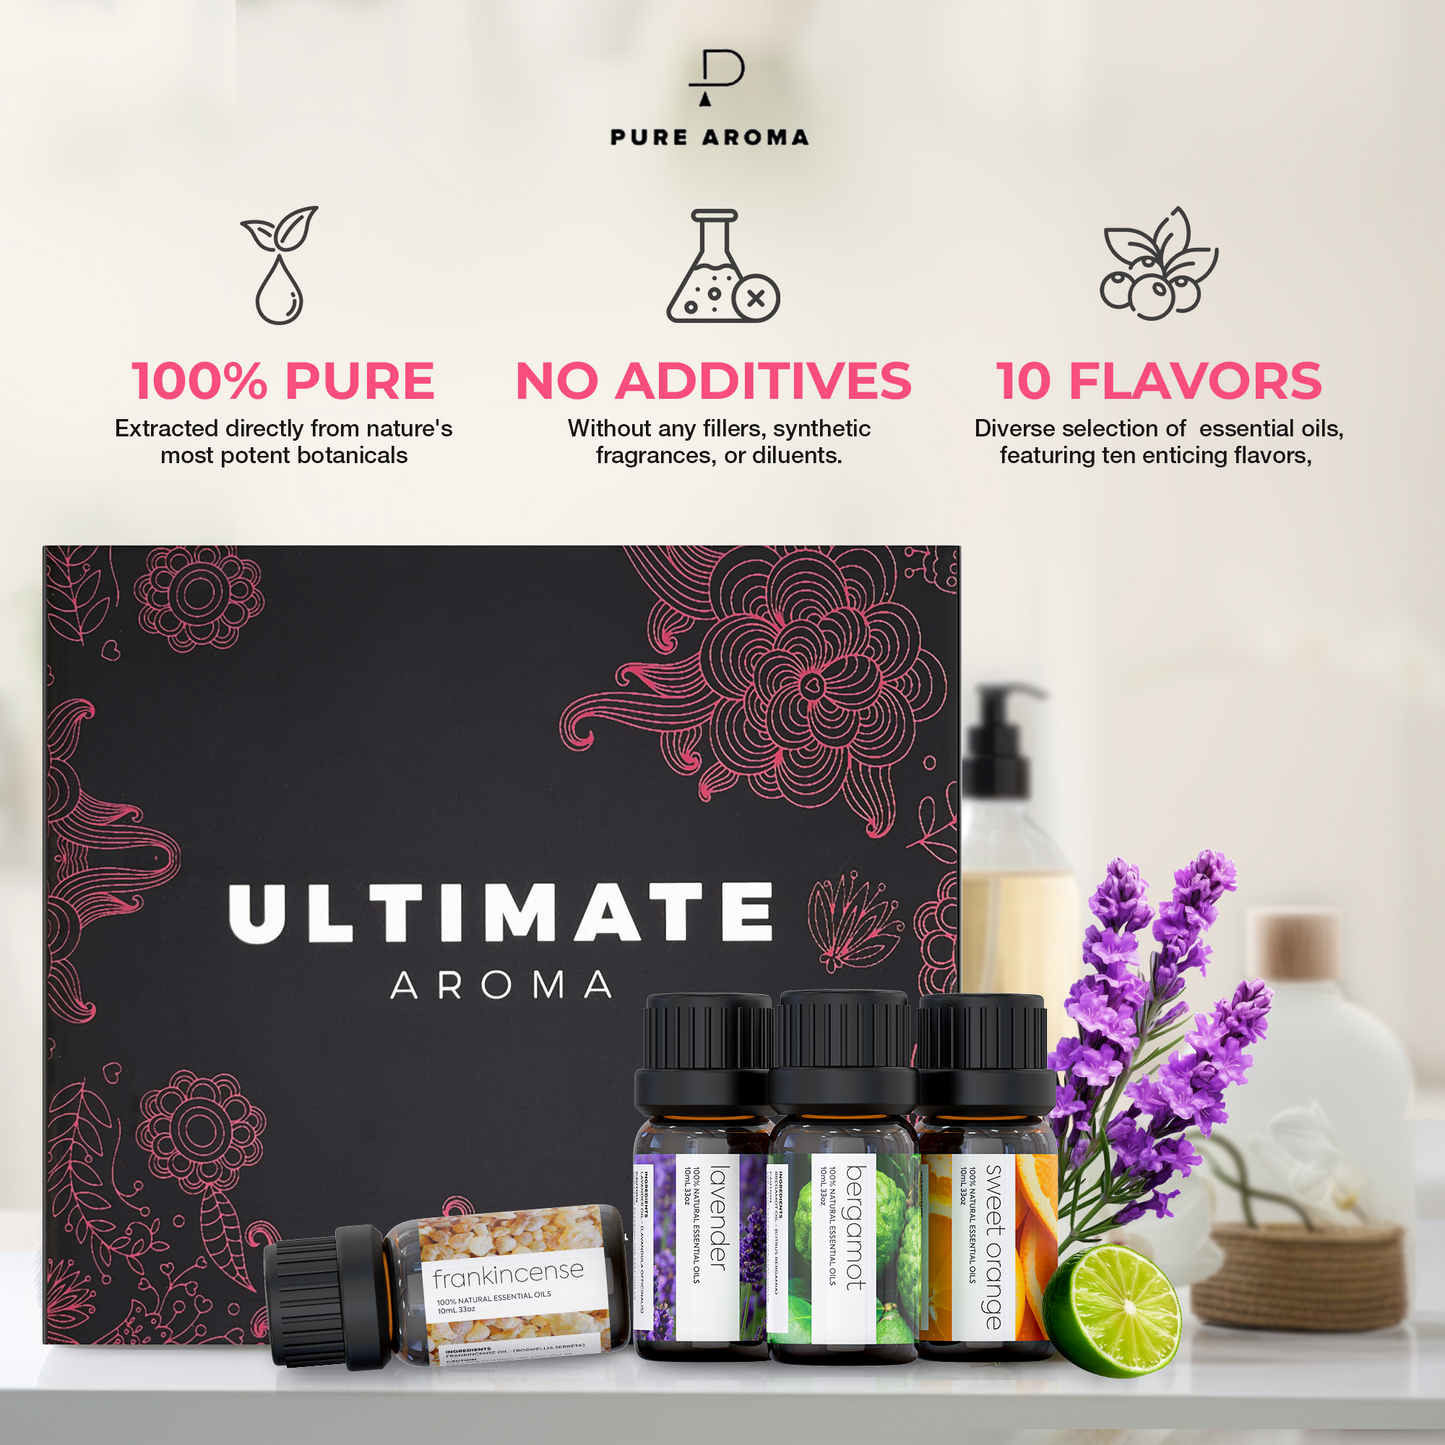 ULTIMATE AROMA Oils - Top 10 Aromatherapy Oils in 1 Box (10 Ml)